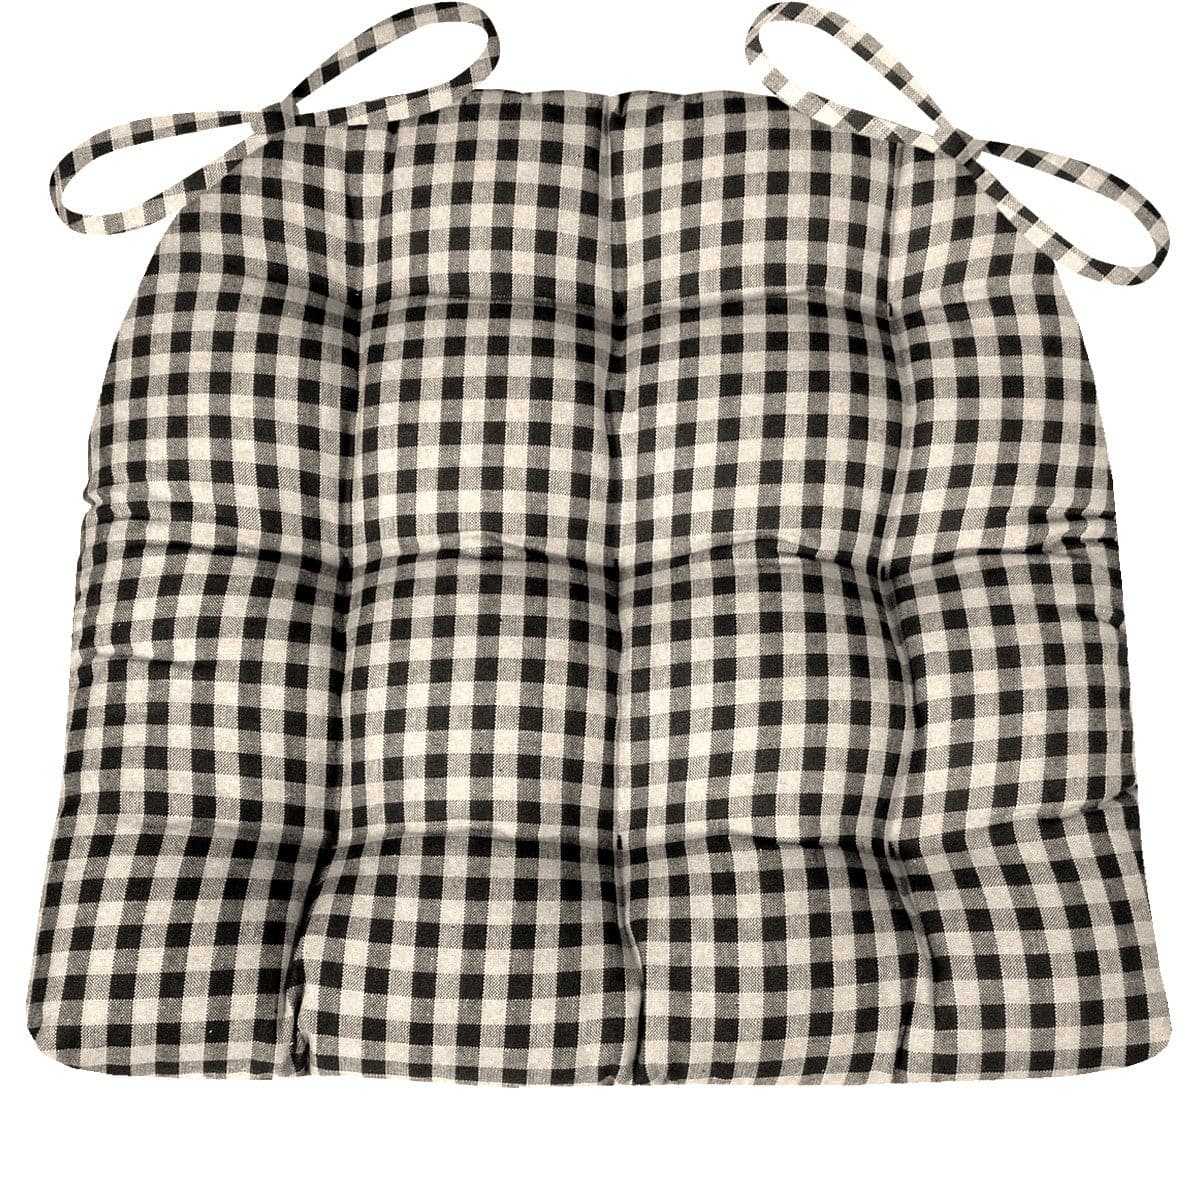 black and white gingham chair pads